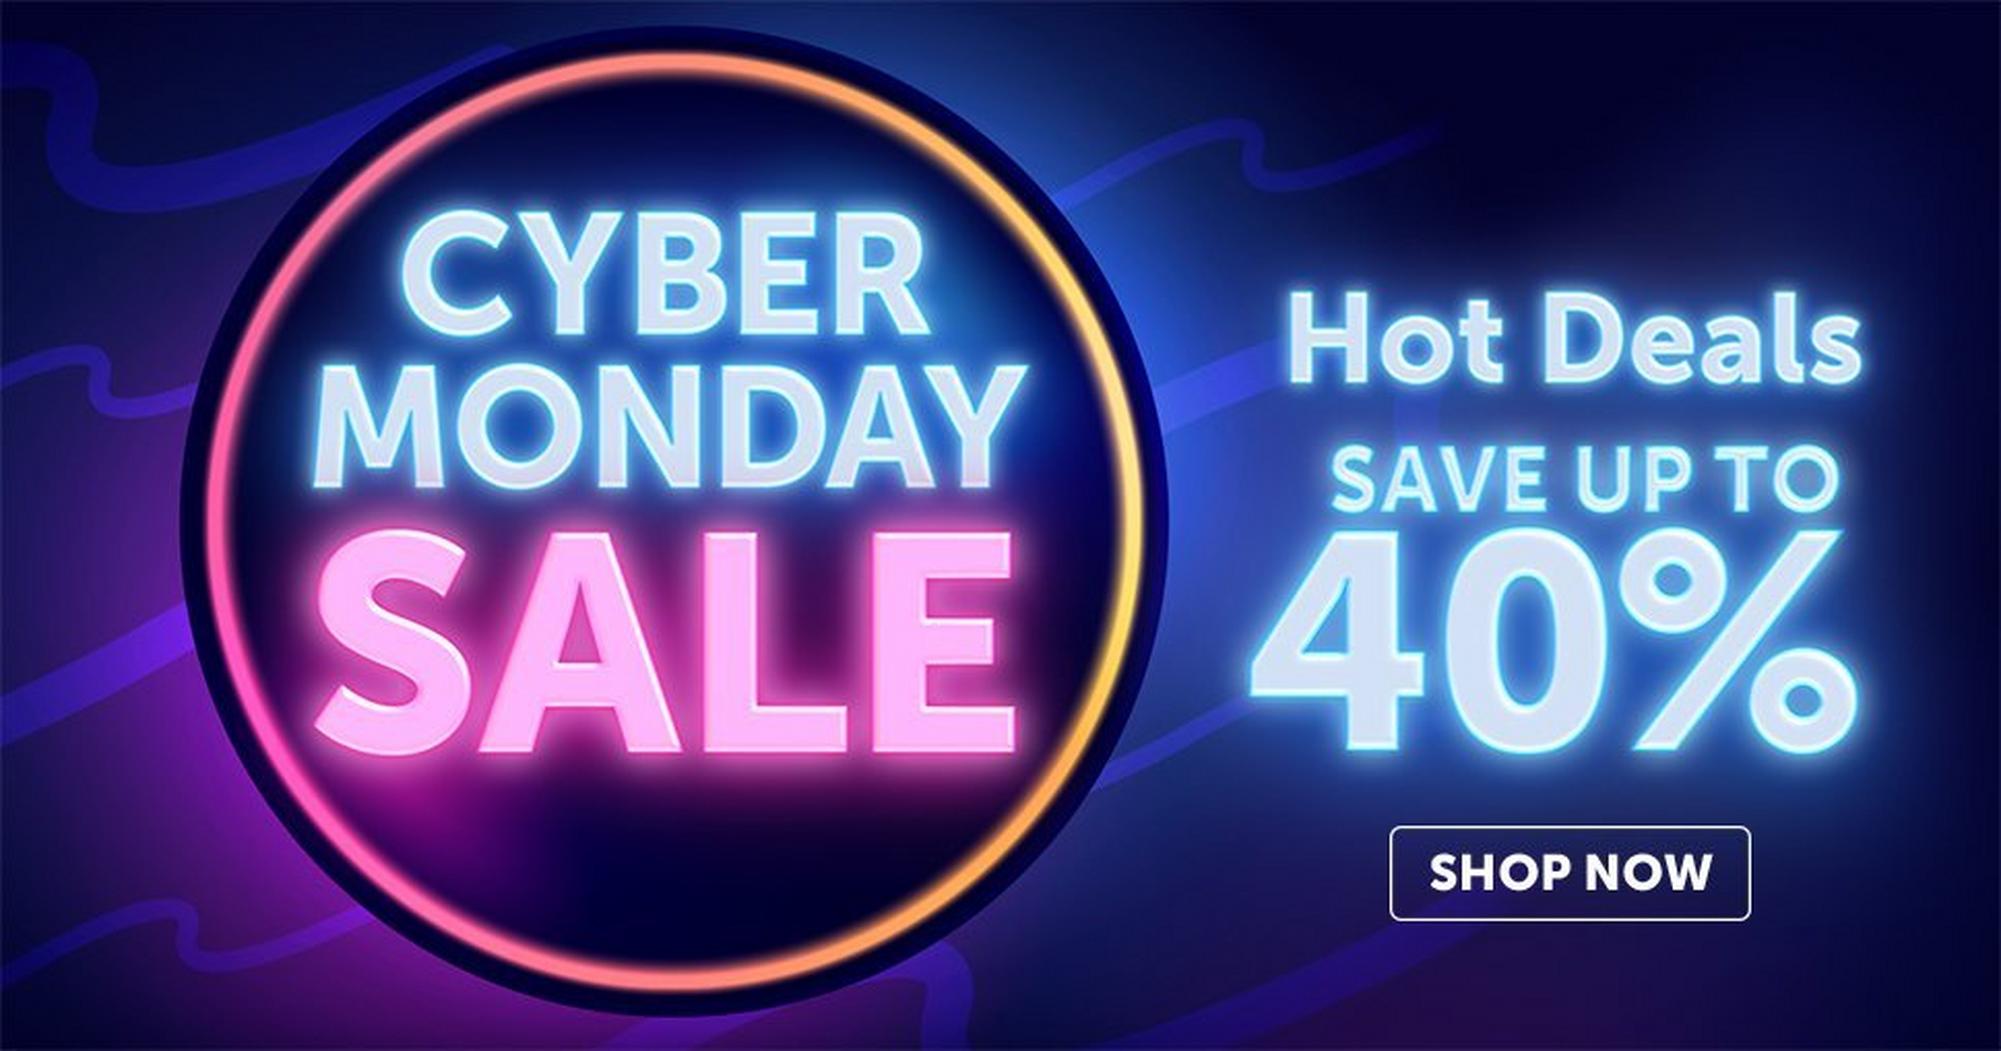 Cyber Monday Sale - Save up to 40%